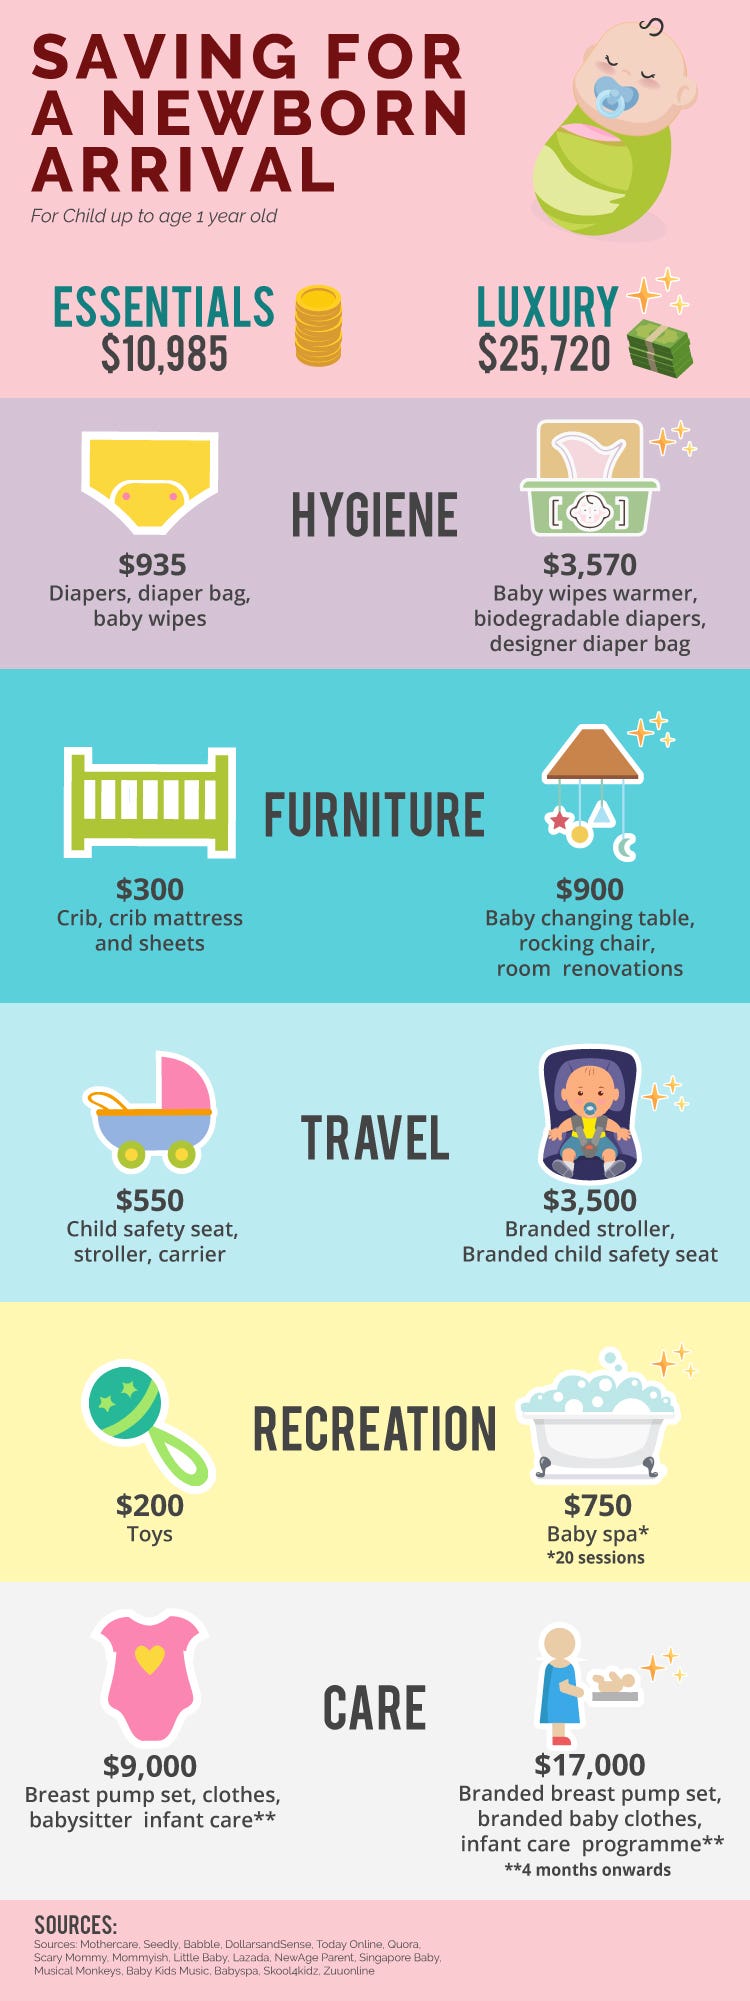 Infographic Design on "Saving for a Newborn Arrival"